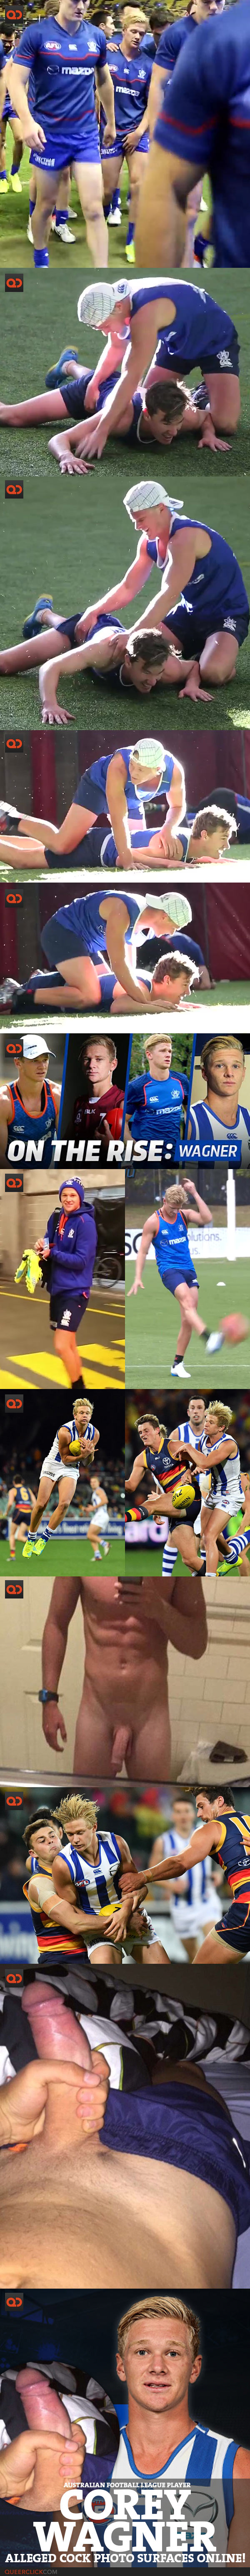 qc-corey_wagner_australian_football_league_player_alleged_cock_photo-collage02